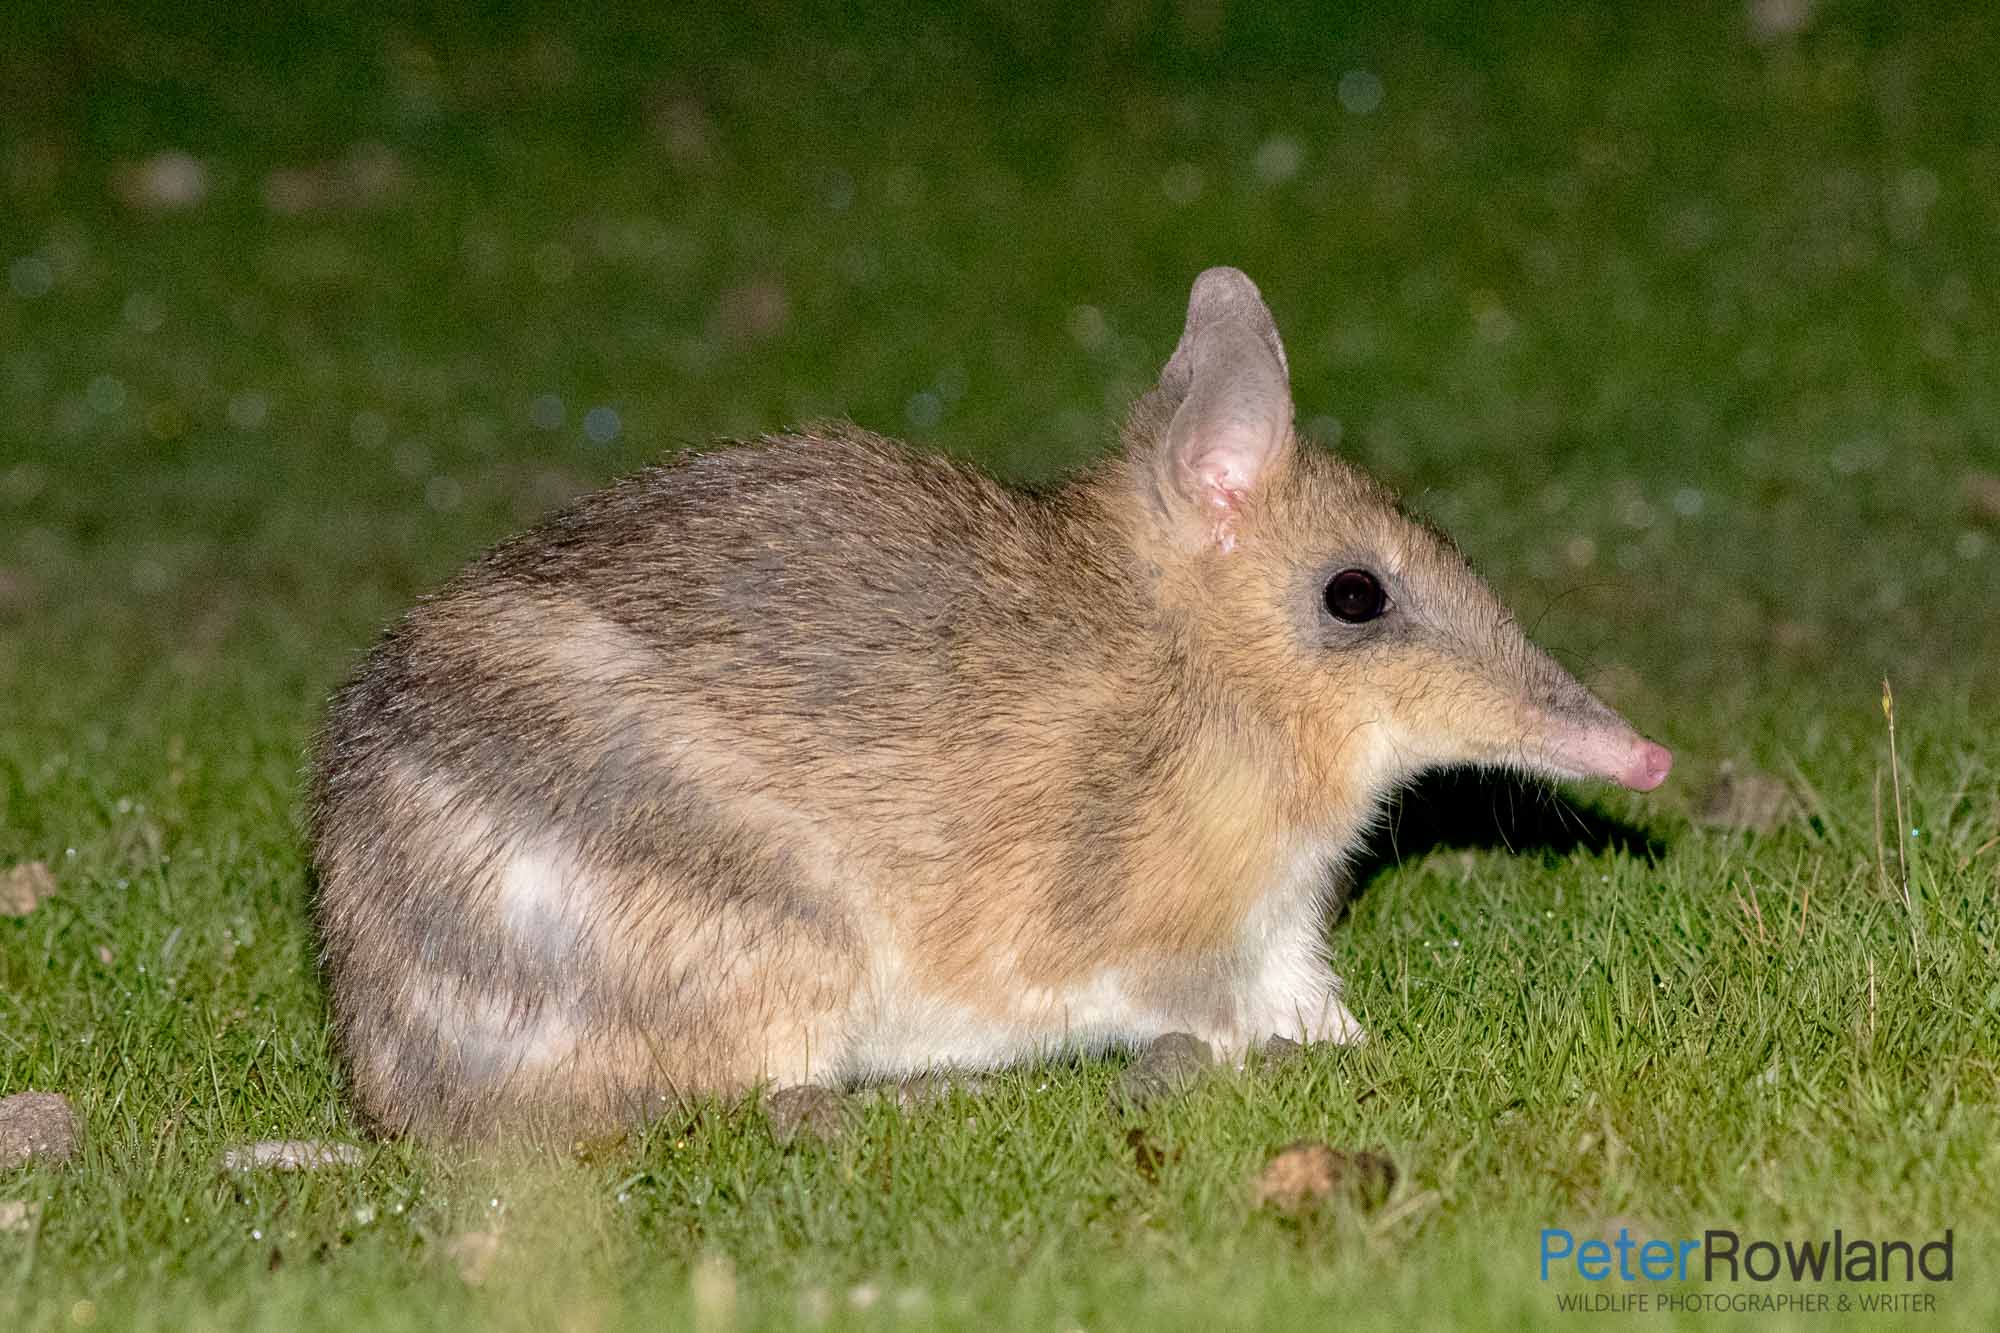 An Eastern Barred Bandicoot in a grassy clearing